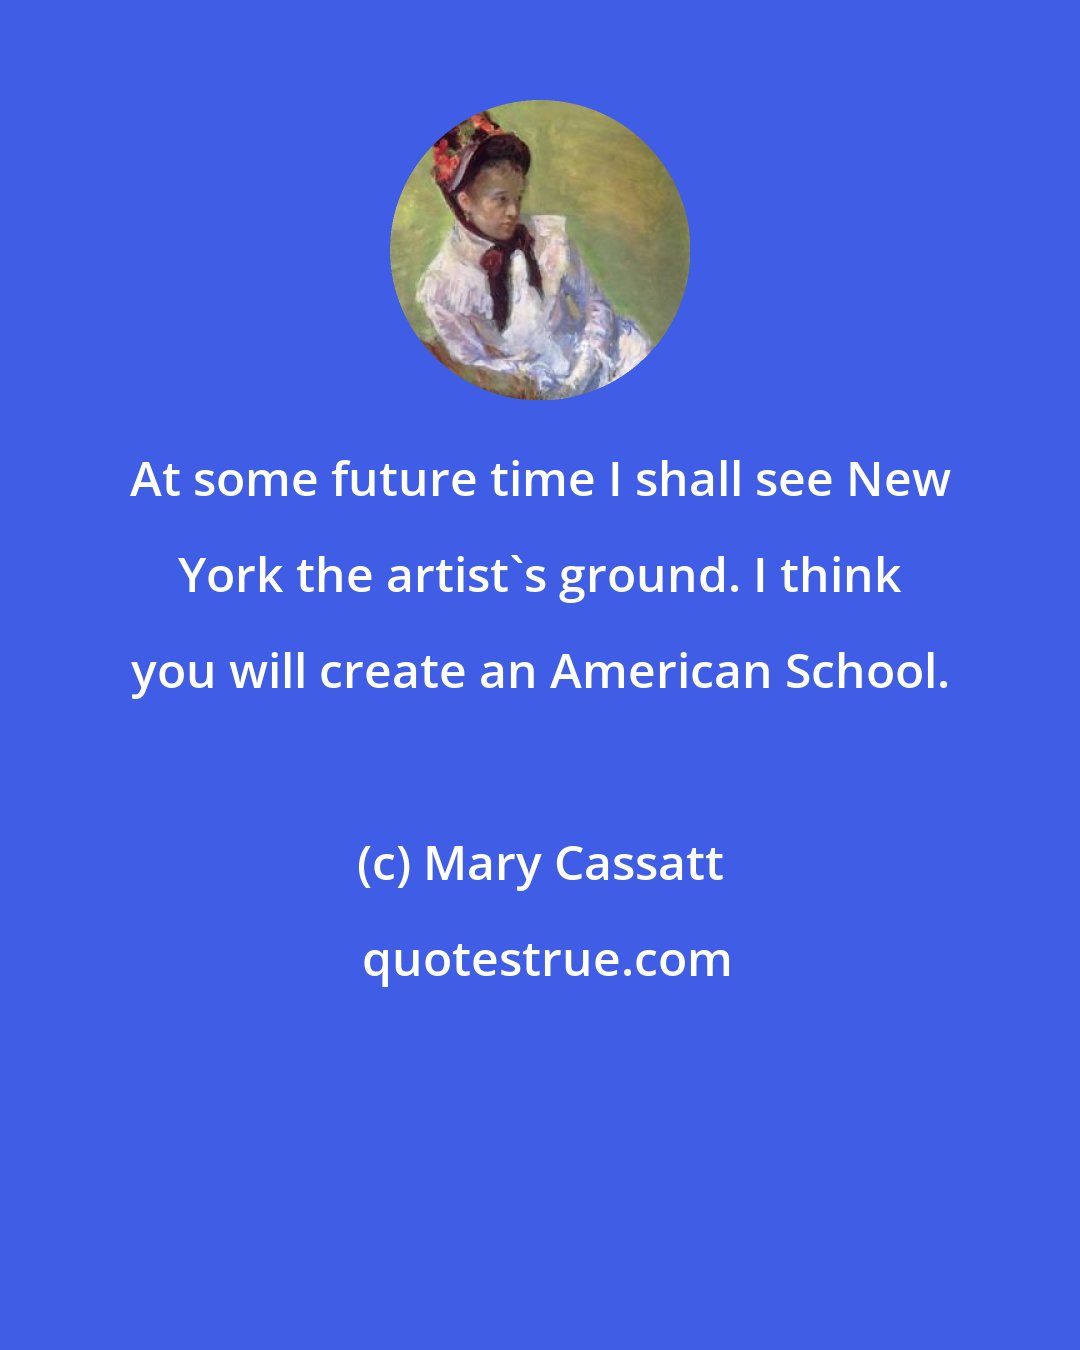 Mary Cassatt: At some future time I shall see New York the artist's ground. I think you will create an American School.